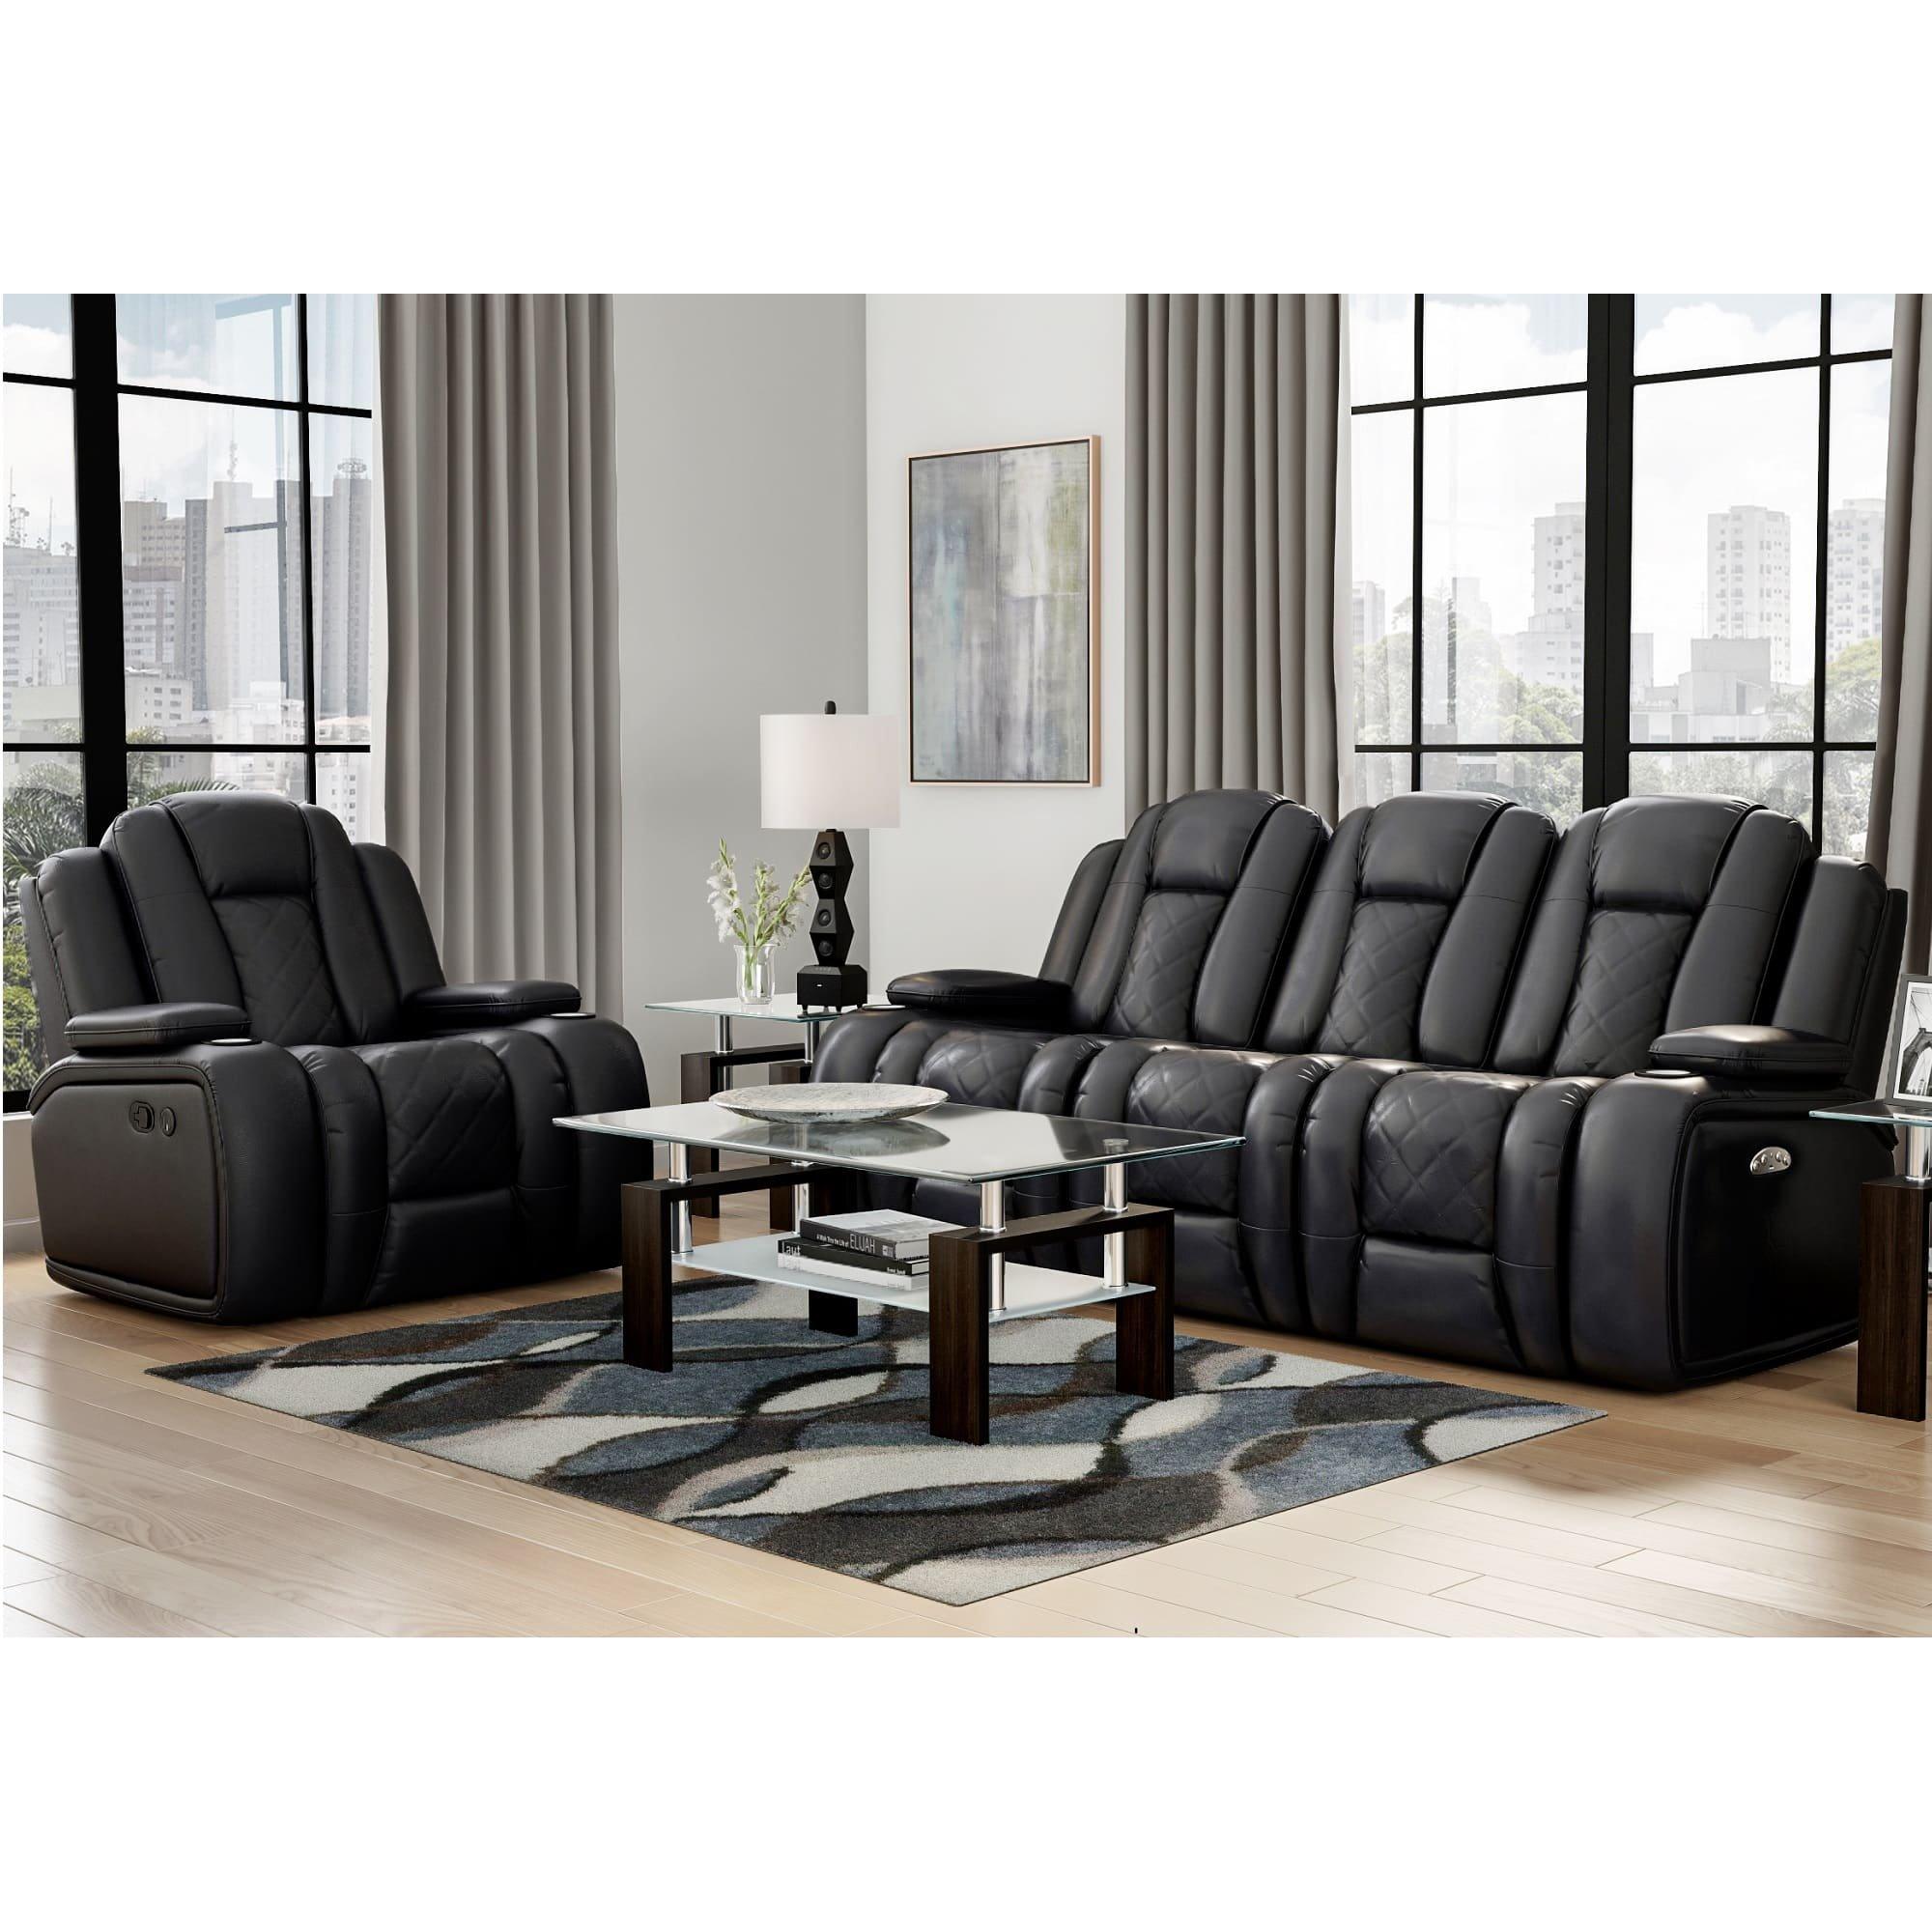 To Own Synergy Home Furnishings 2, Reclining Living Room